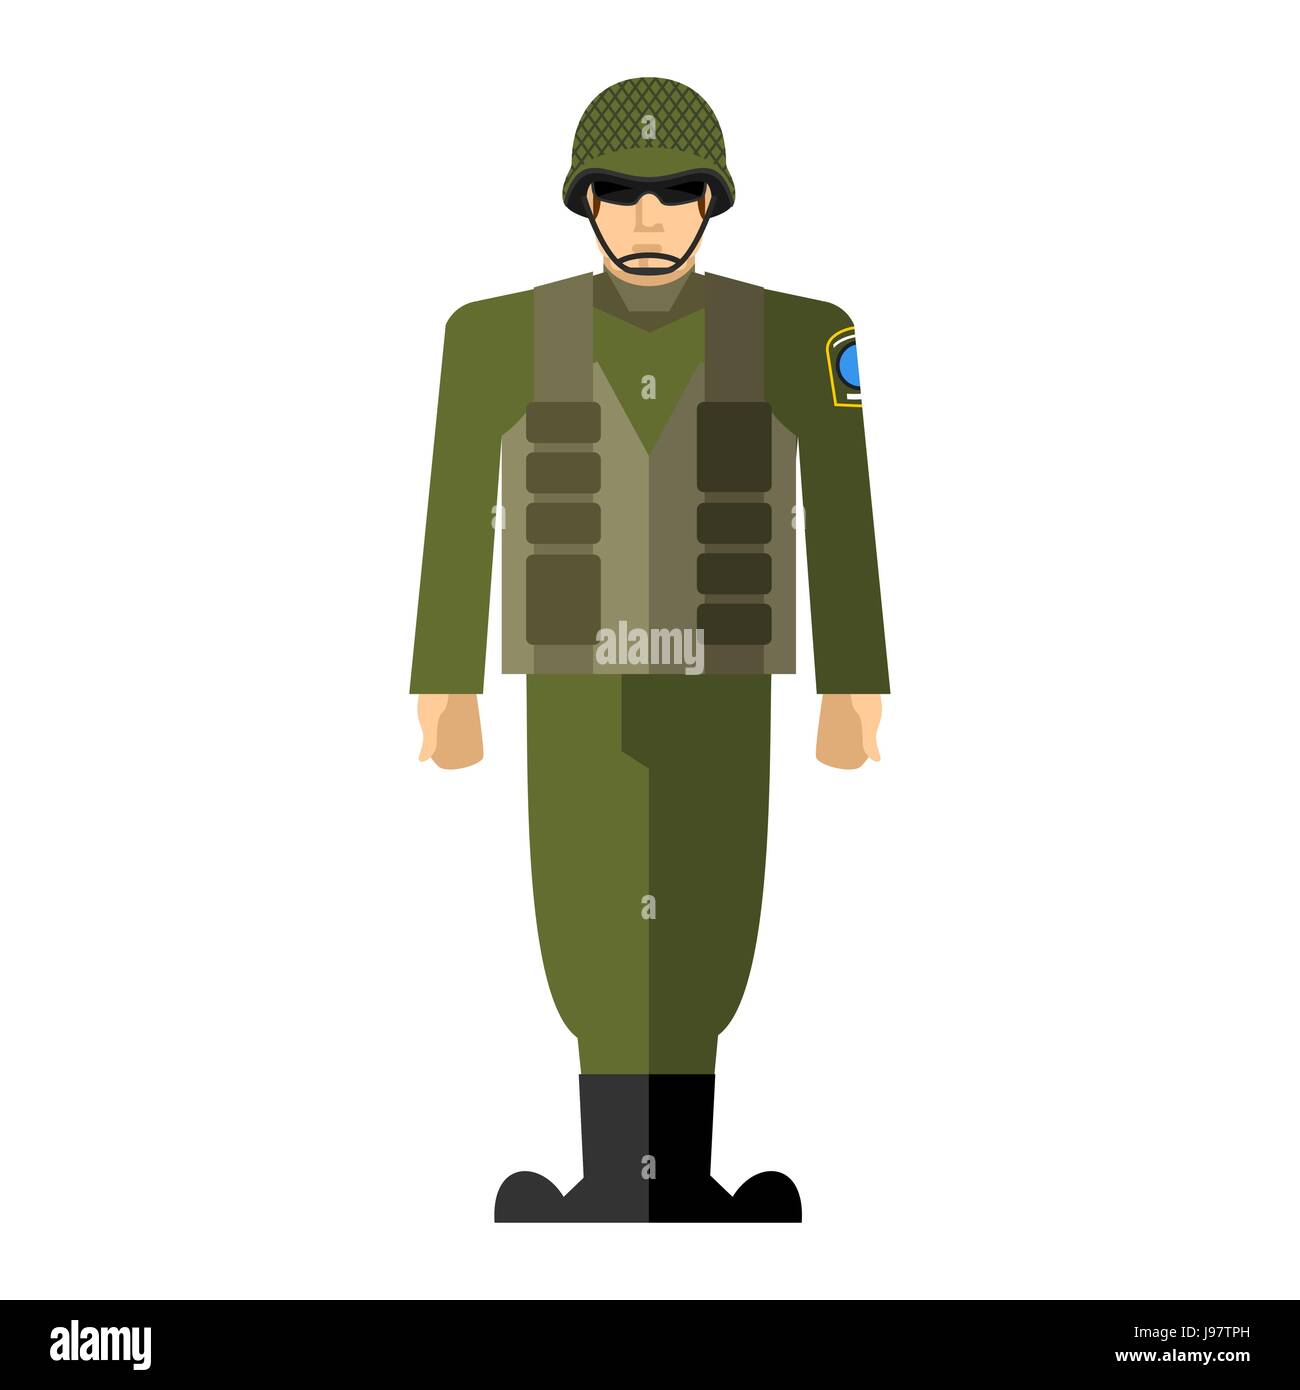 Soldiers. Vector illustration of a military man. Army clothing, full of ammunition: helmet and body armor. Stock Vector